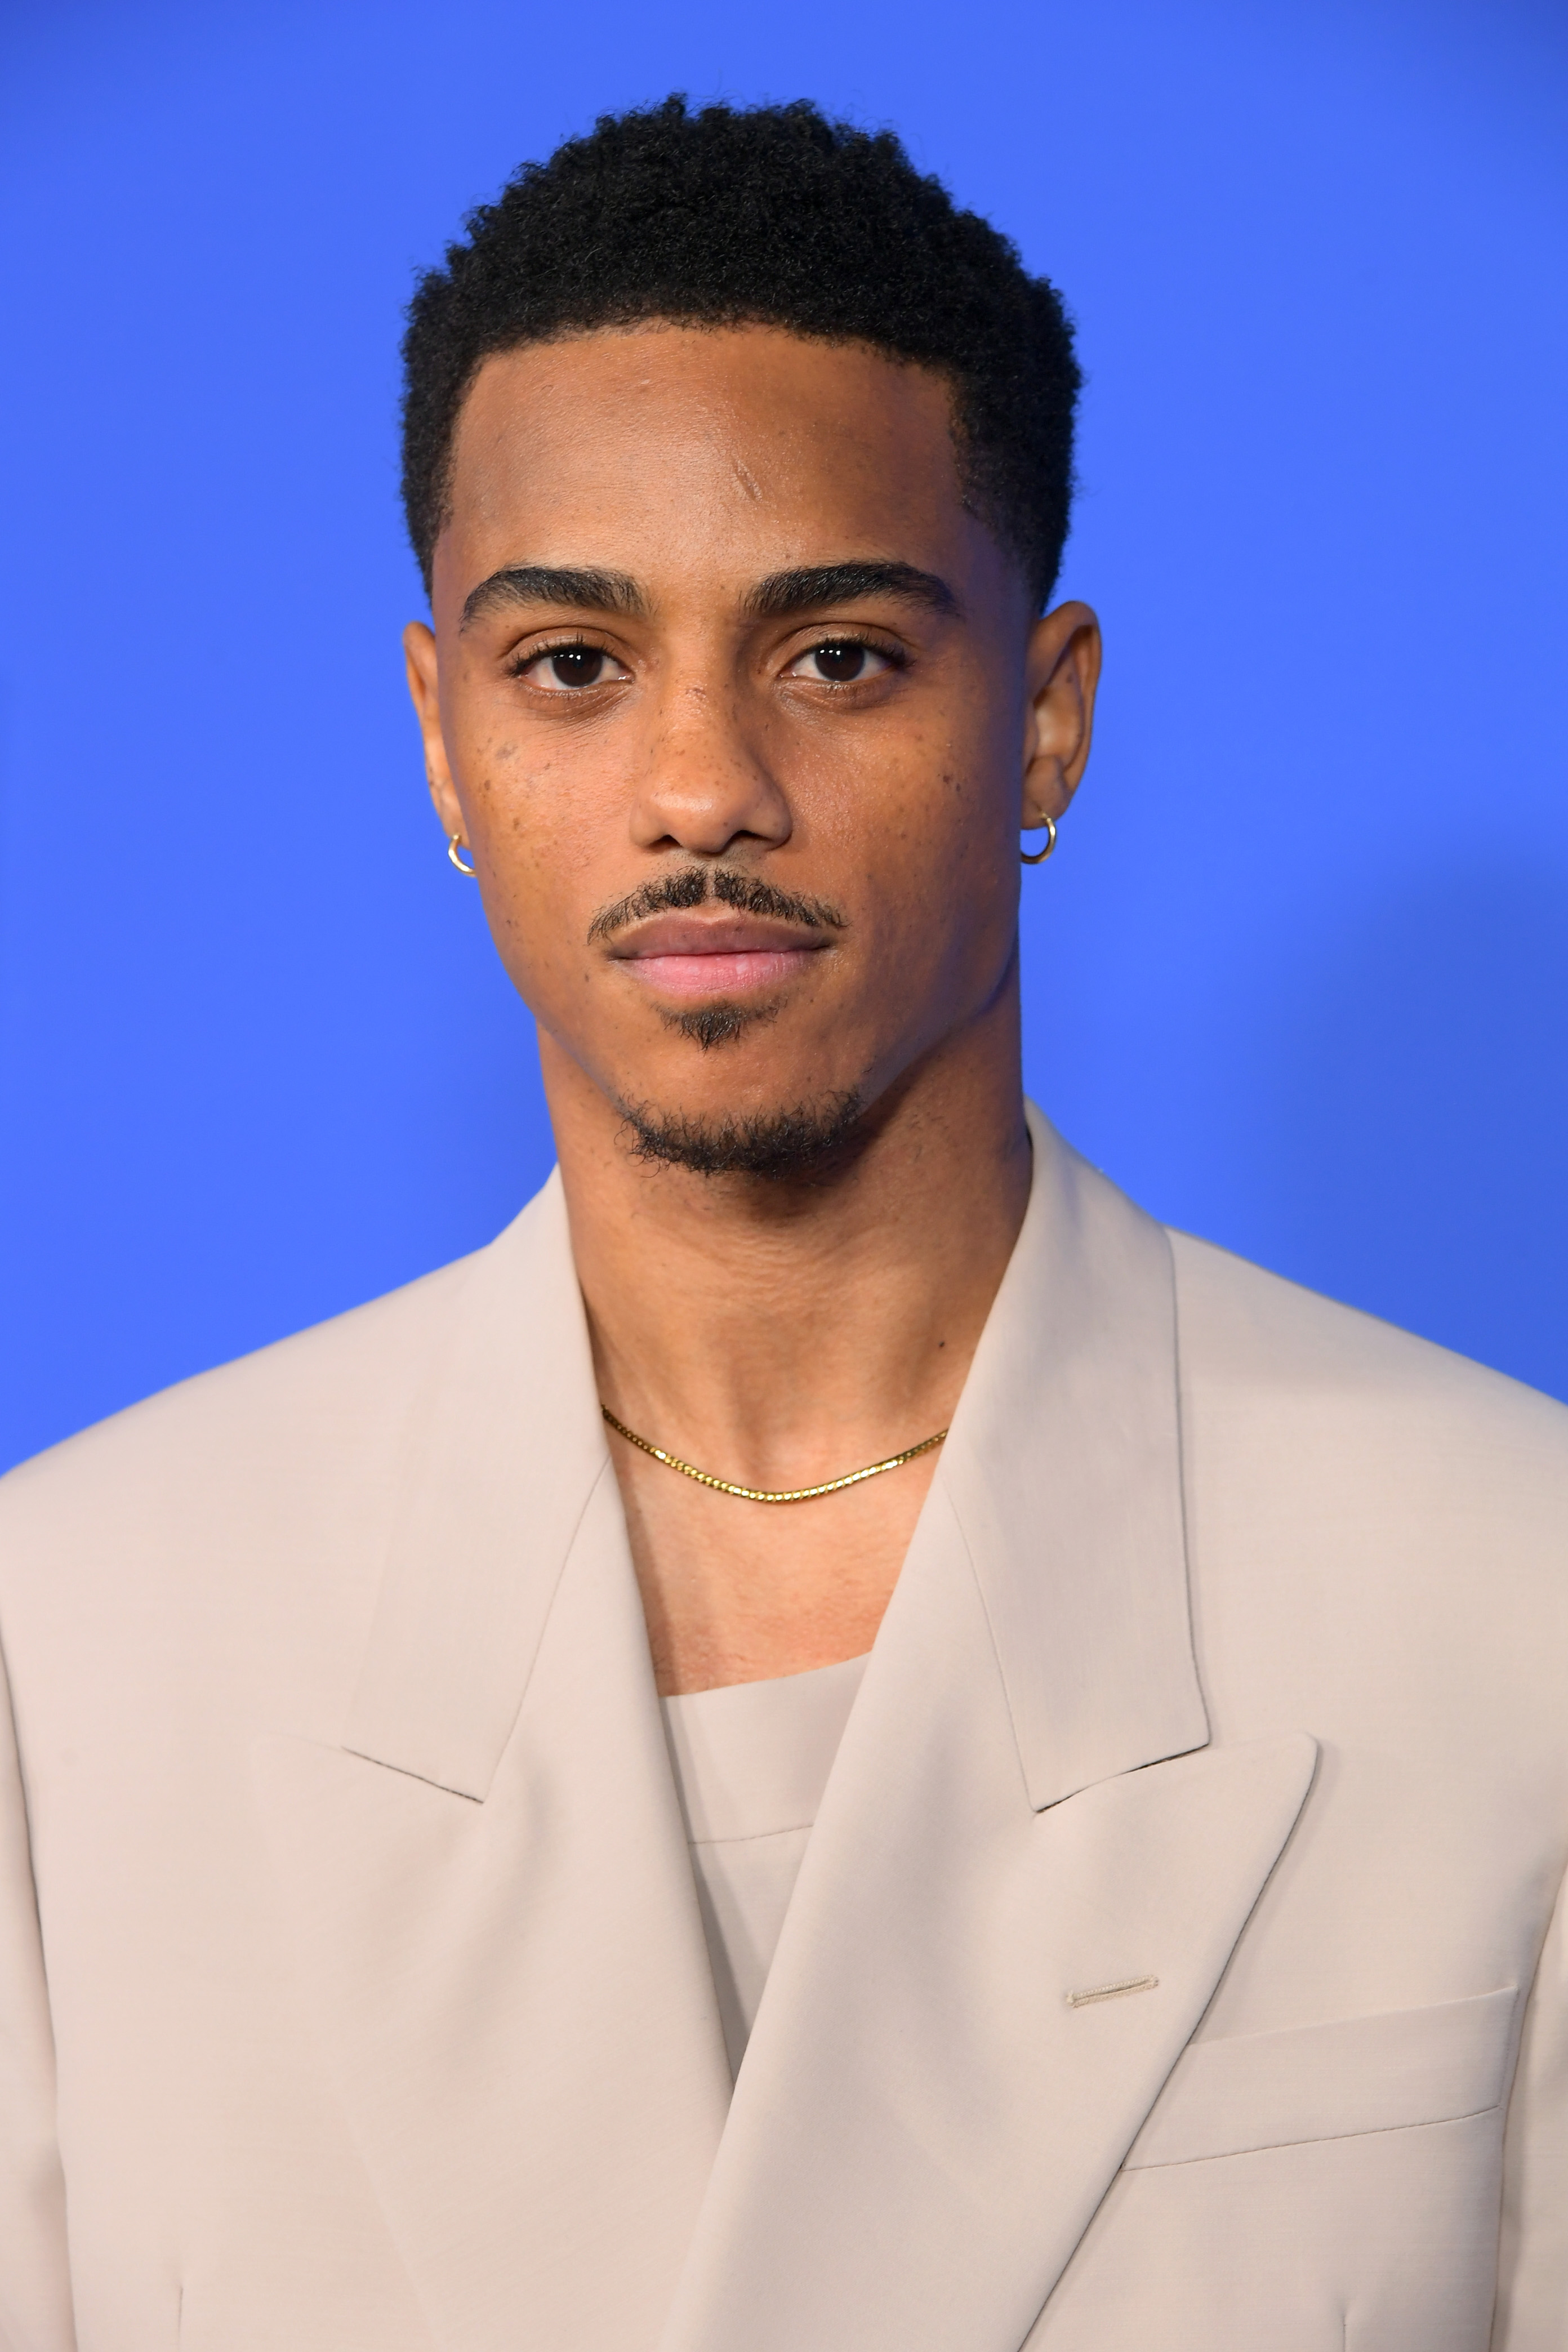 Keith Powers' Girlfriend The 'The Perfect Find' Star Has Not Been